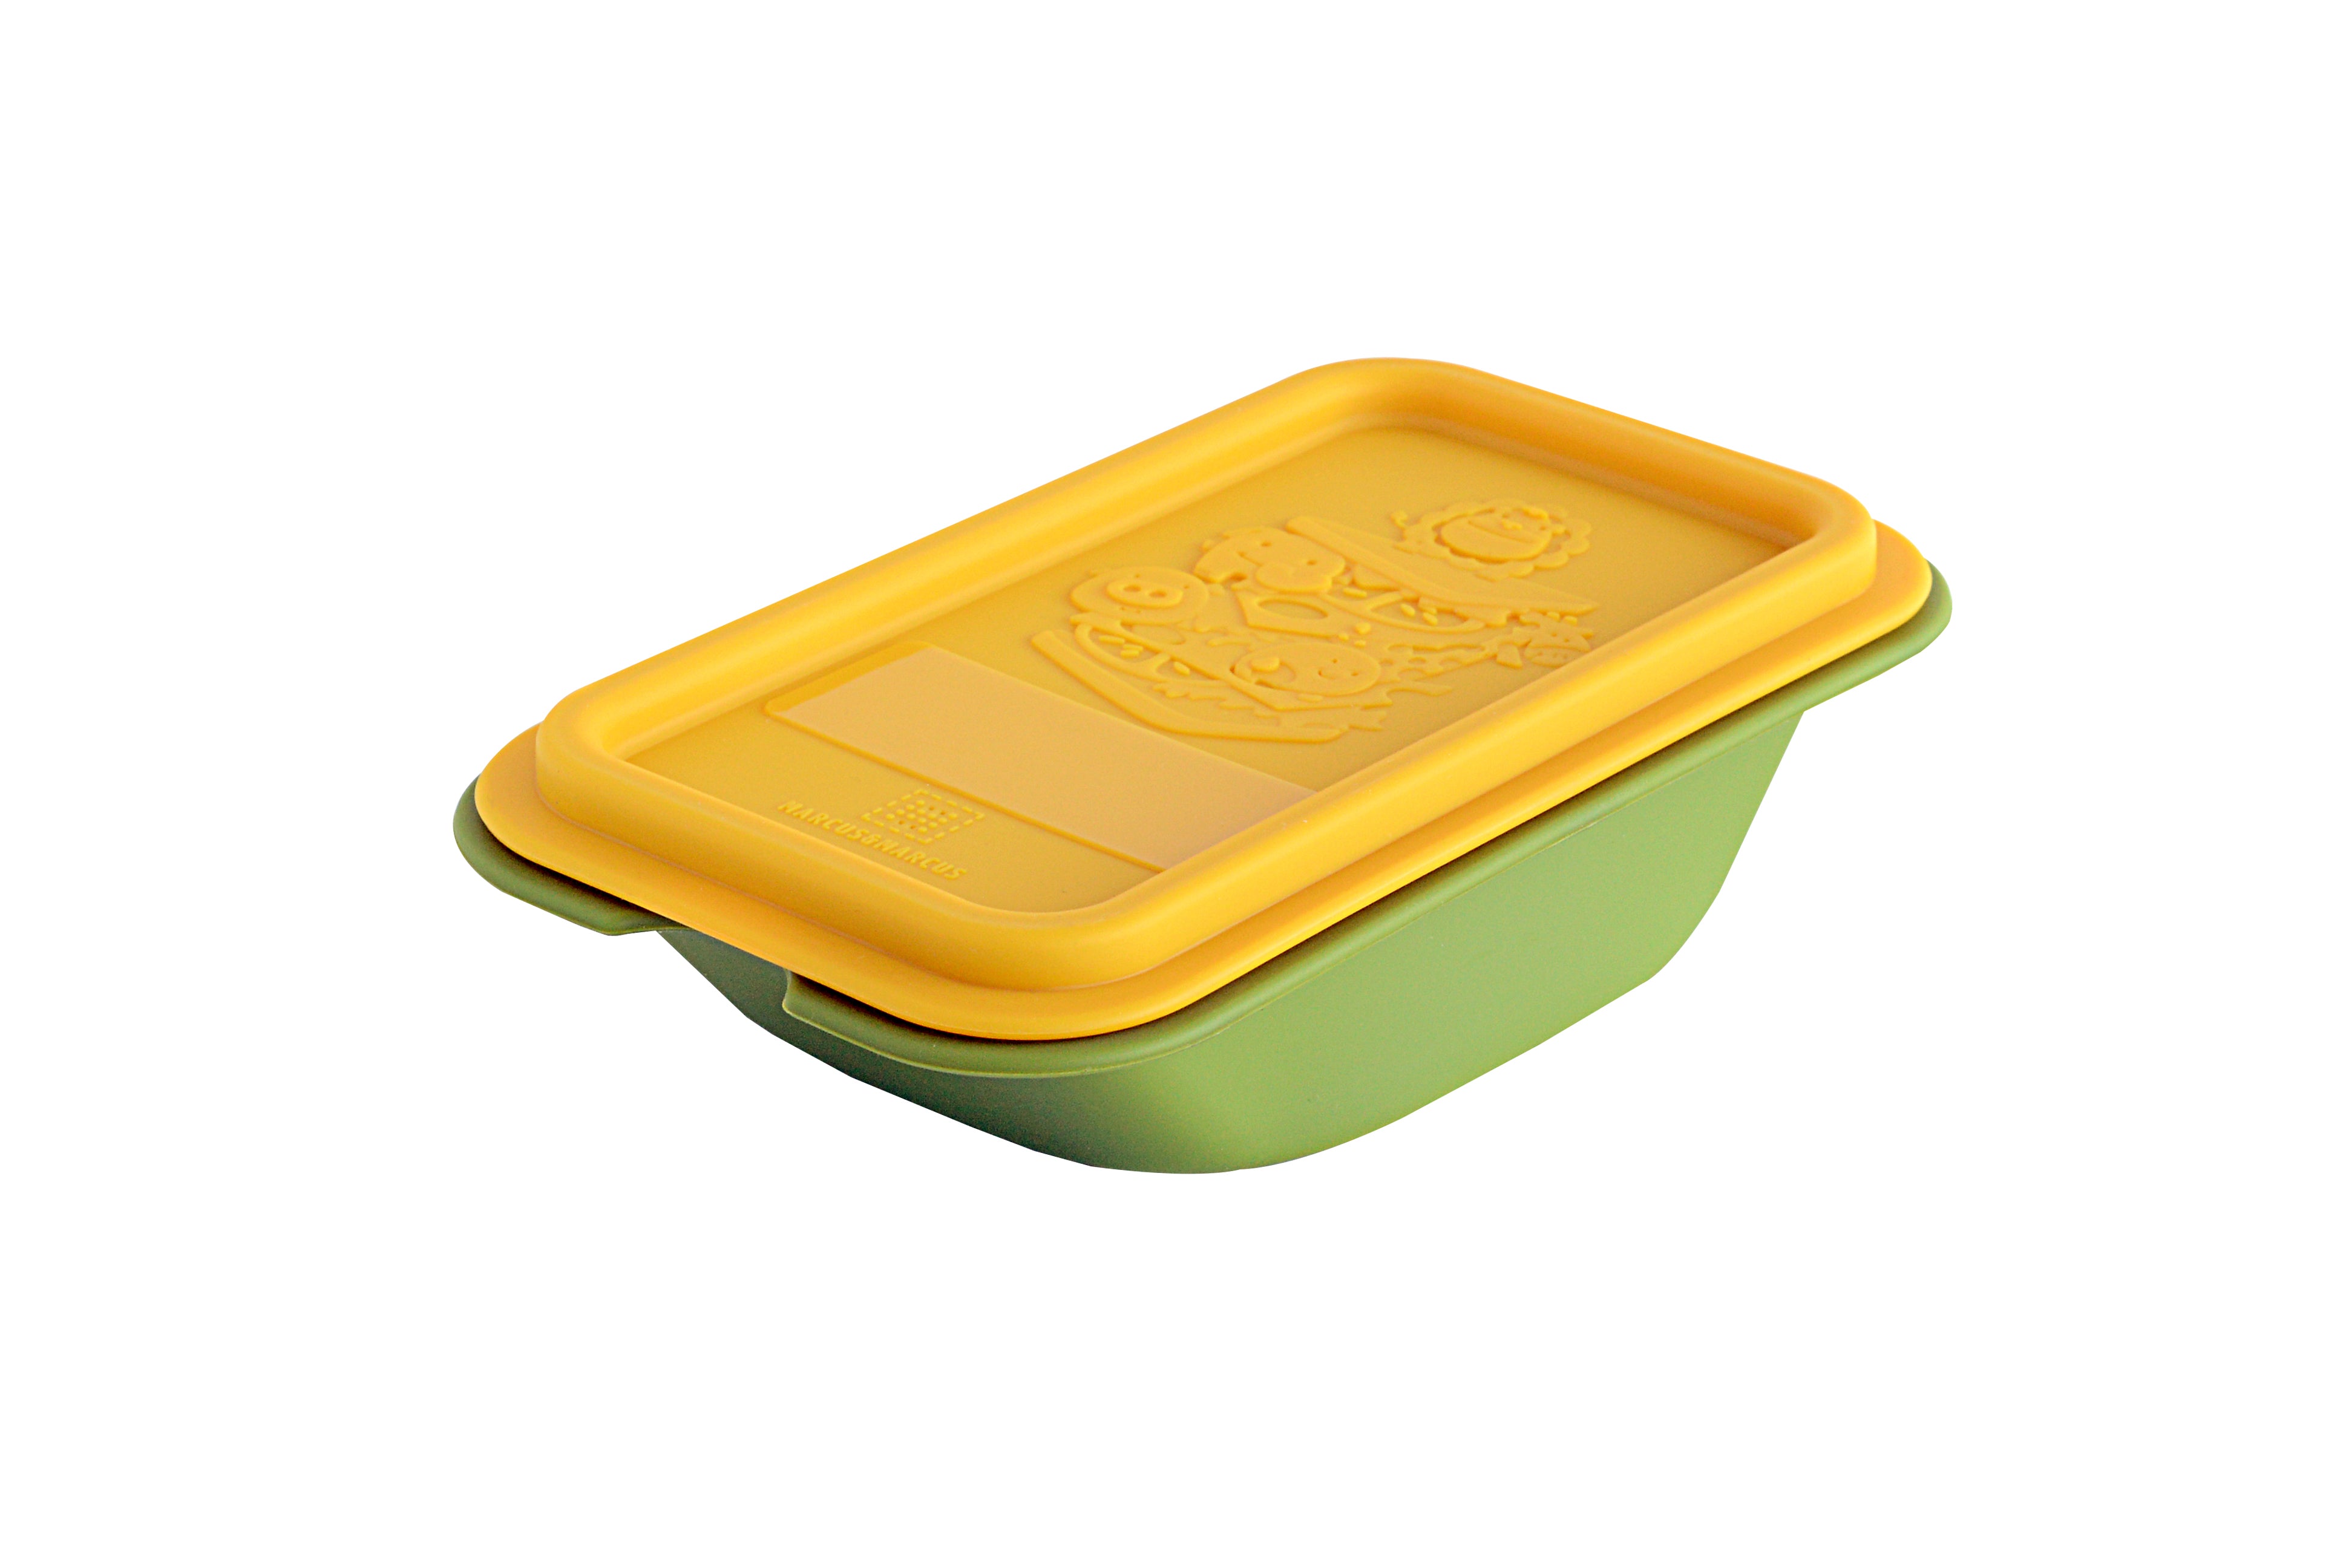  MdakeGo 3 Pack Sandwich Containers,3 Color Silicone